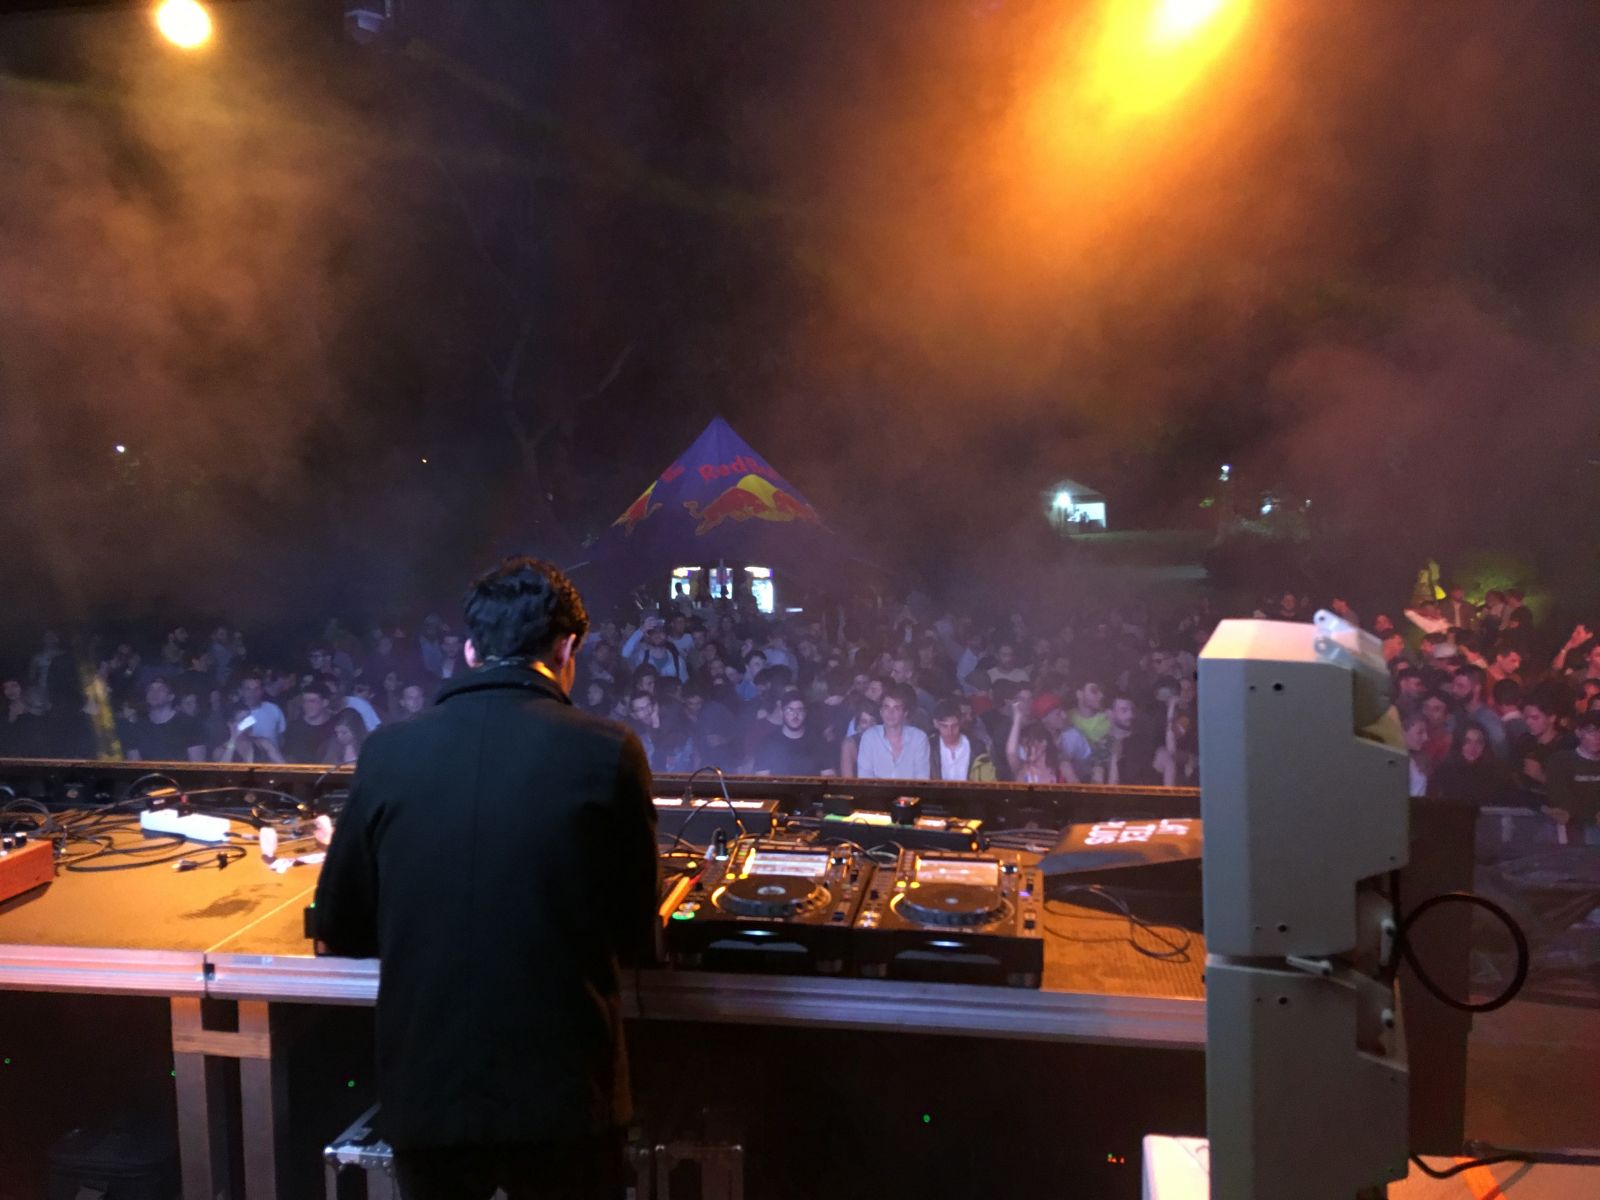 Hunee delivered arguably the best set of the weekend as he closed the festival on the first night.